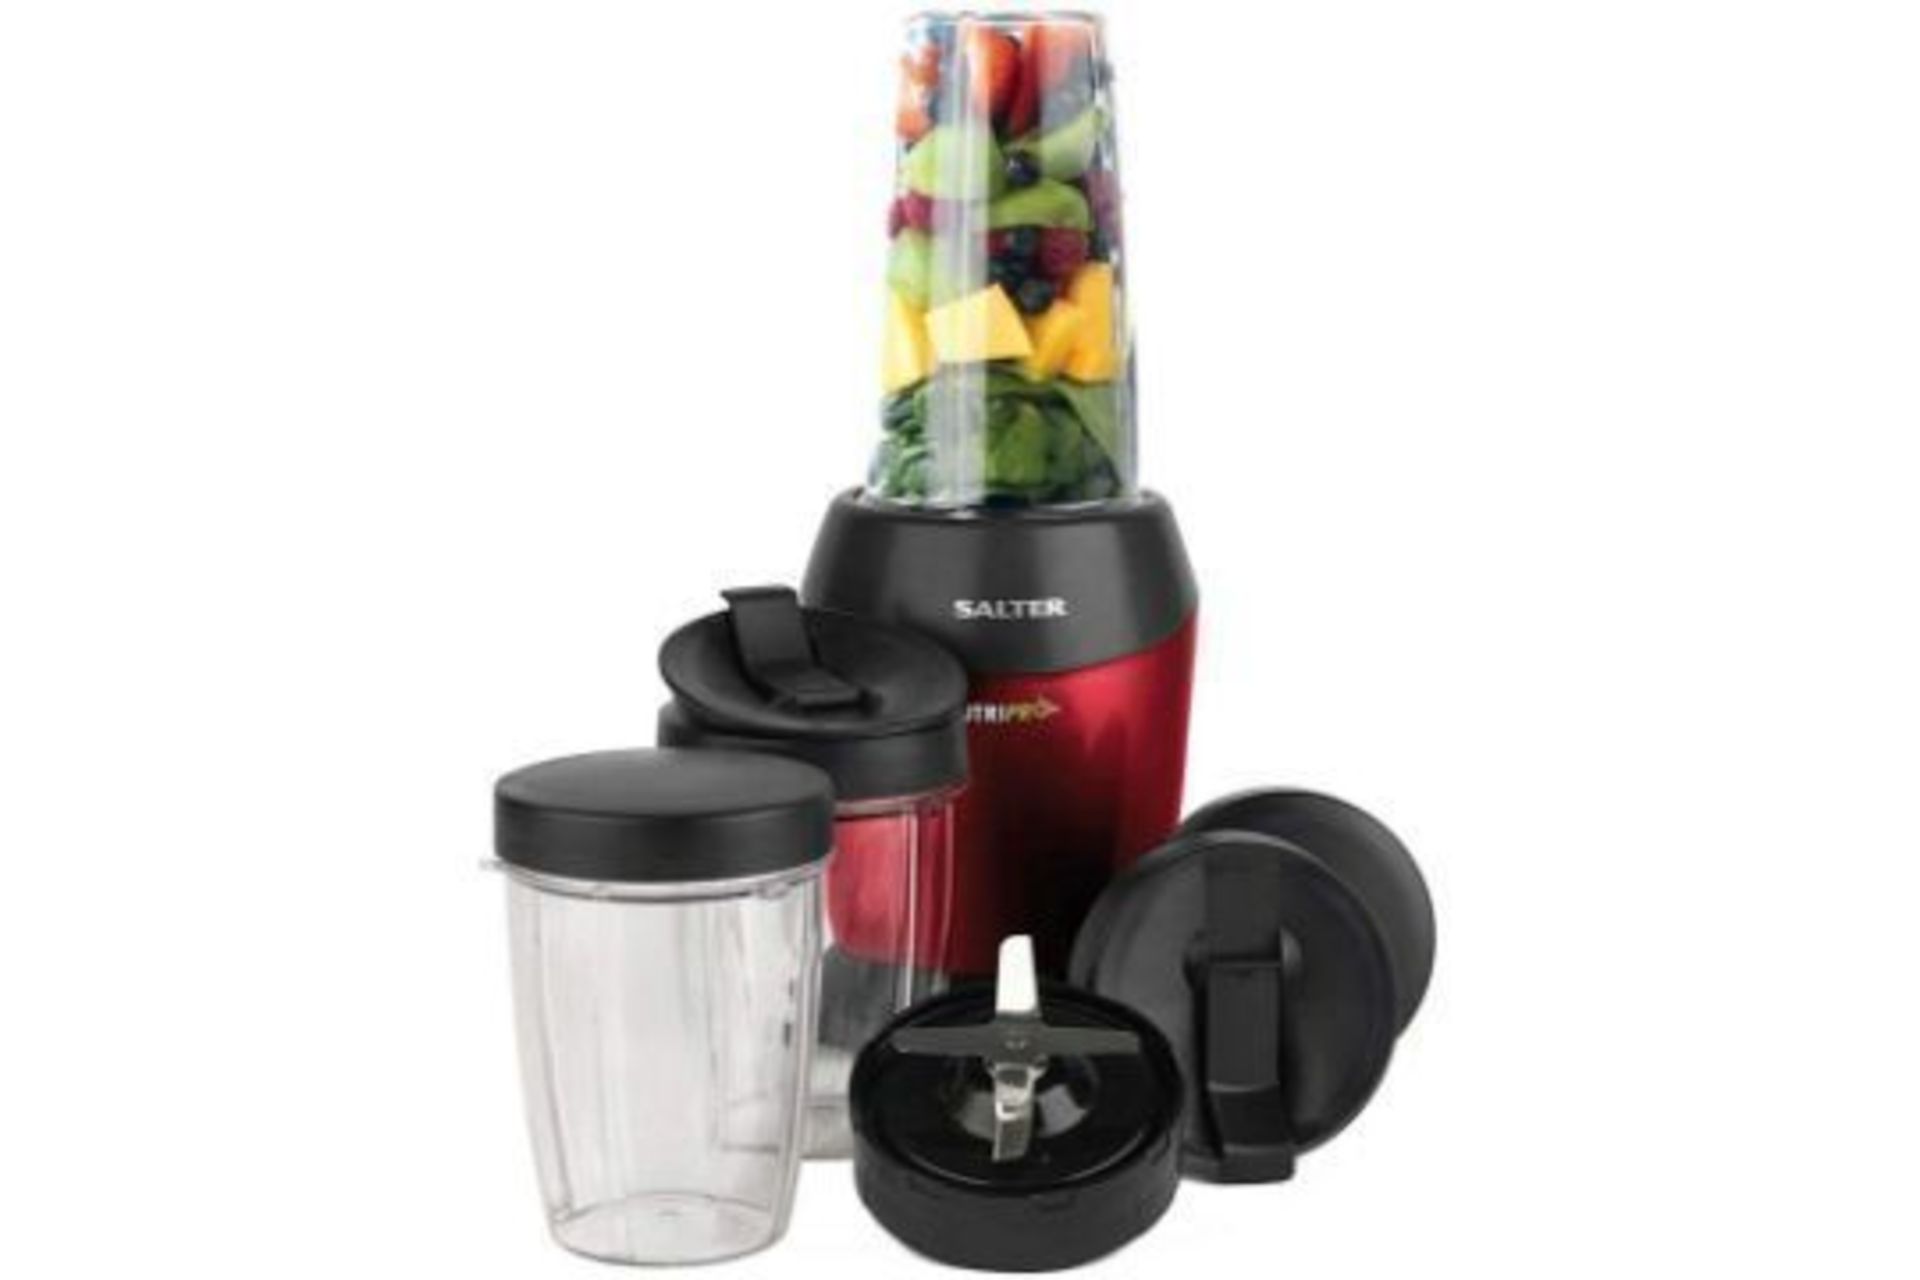 Brand New Salter Nutri Pro 1200w Red Blender & Attachments - Image 2 of 2